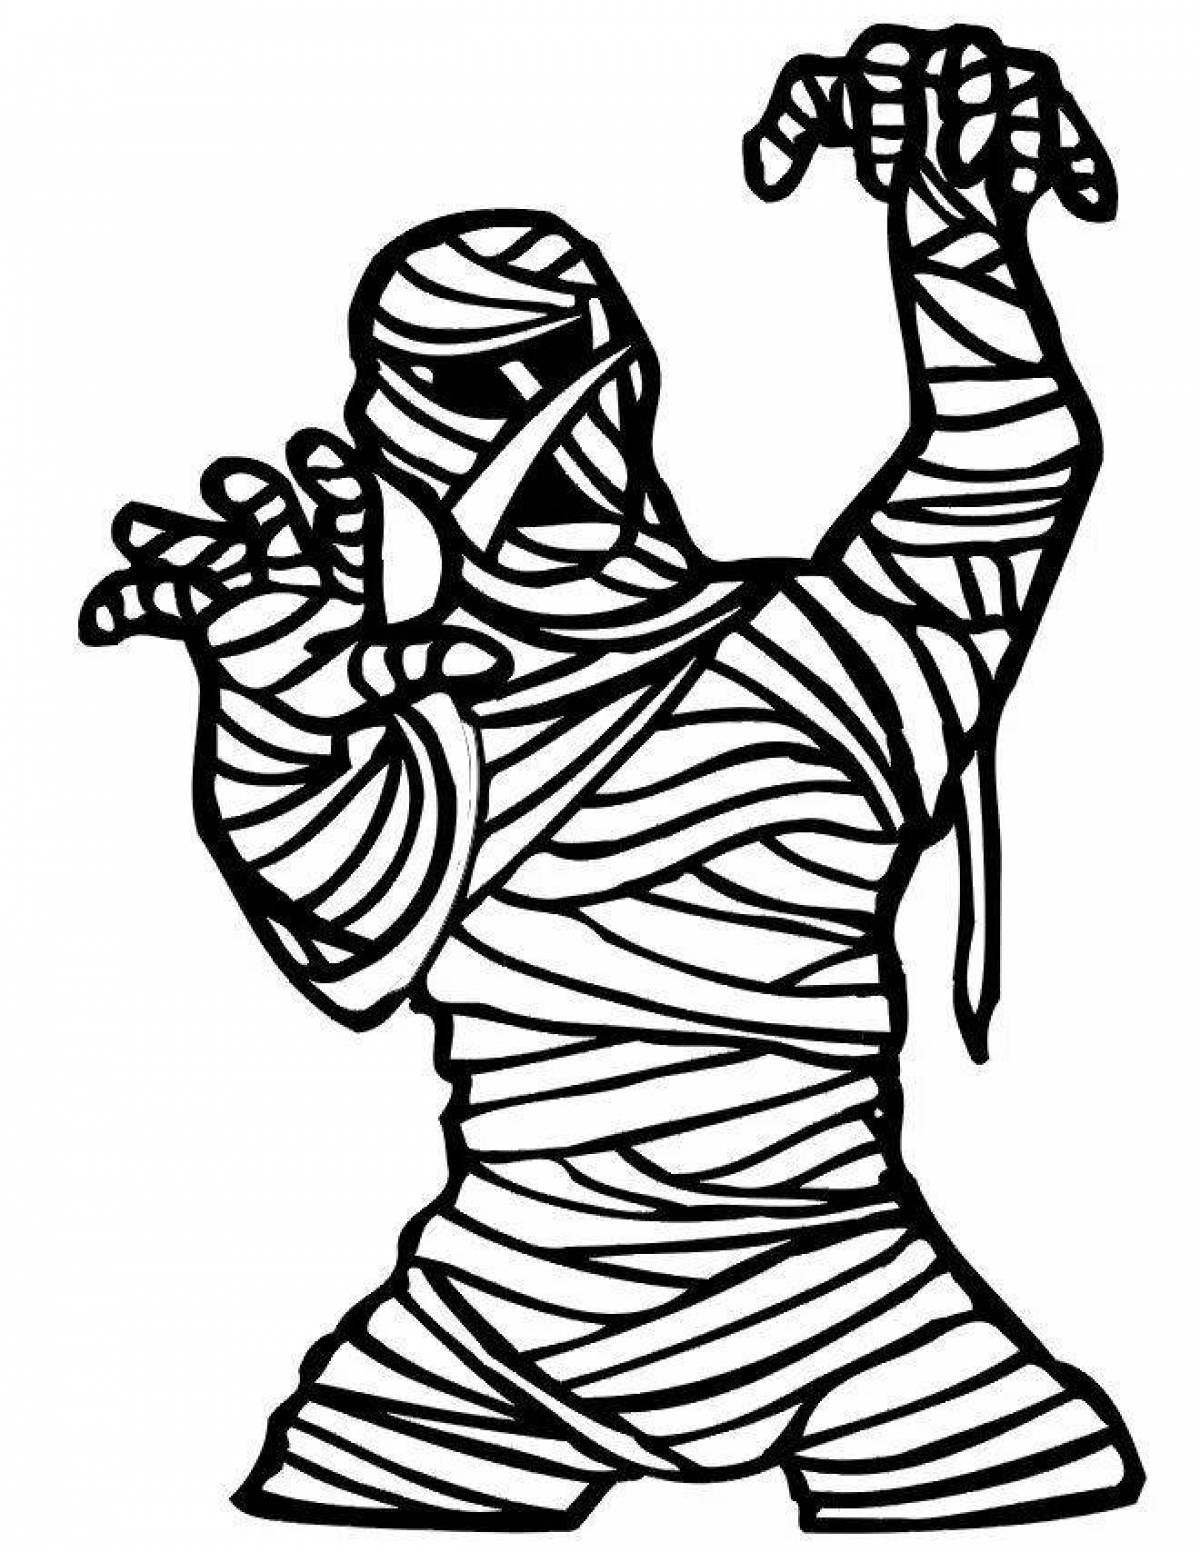 Coloring page mummy standing on end